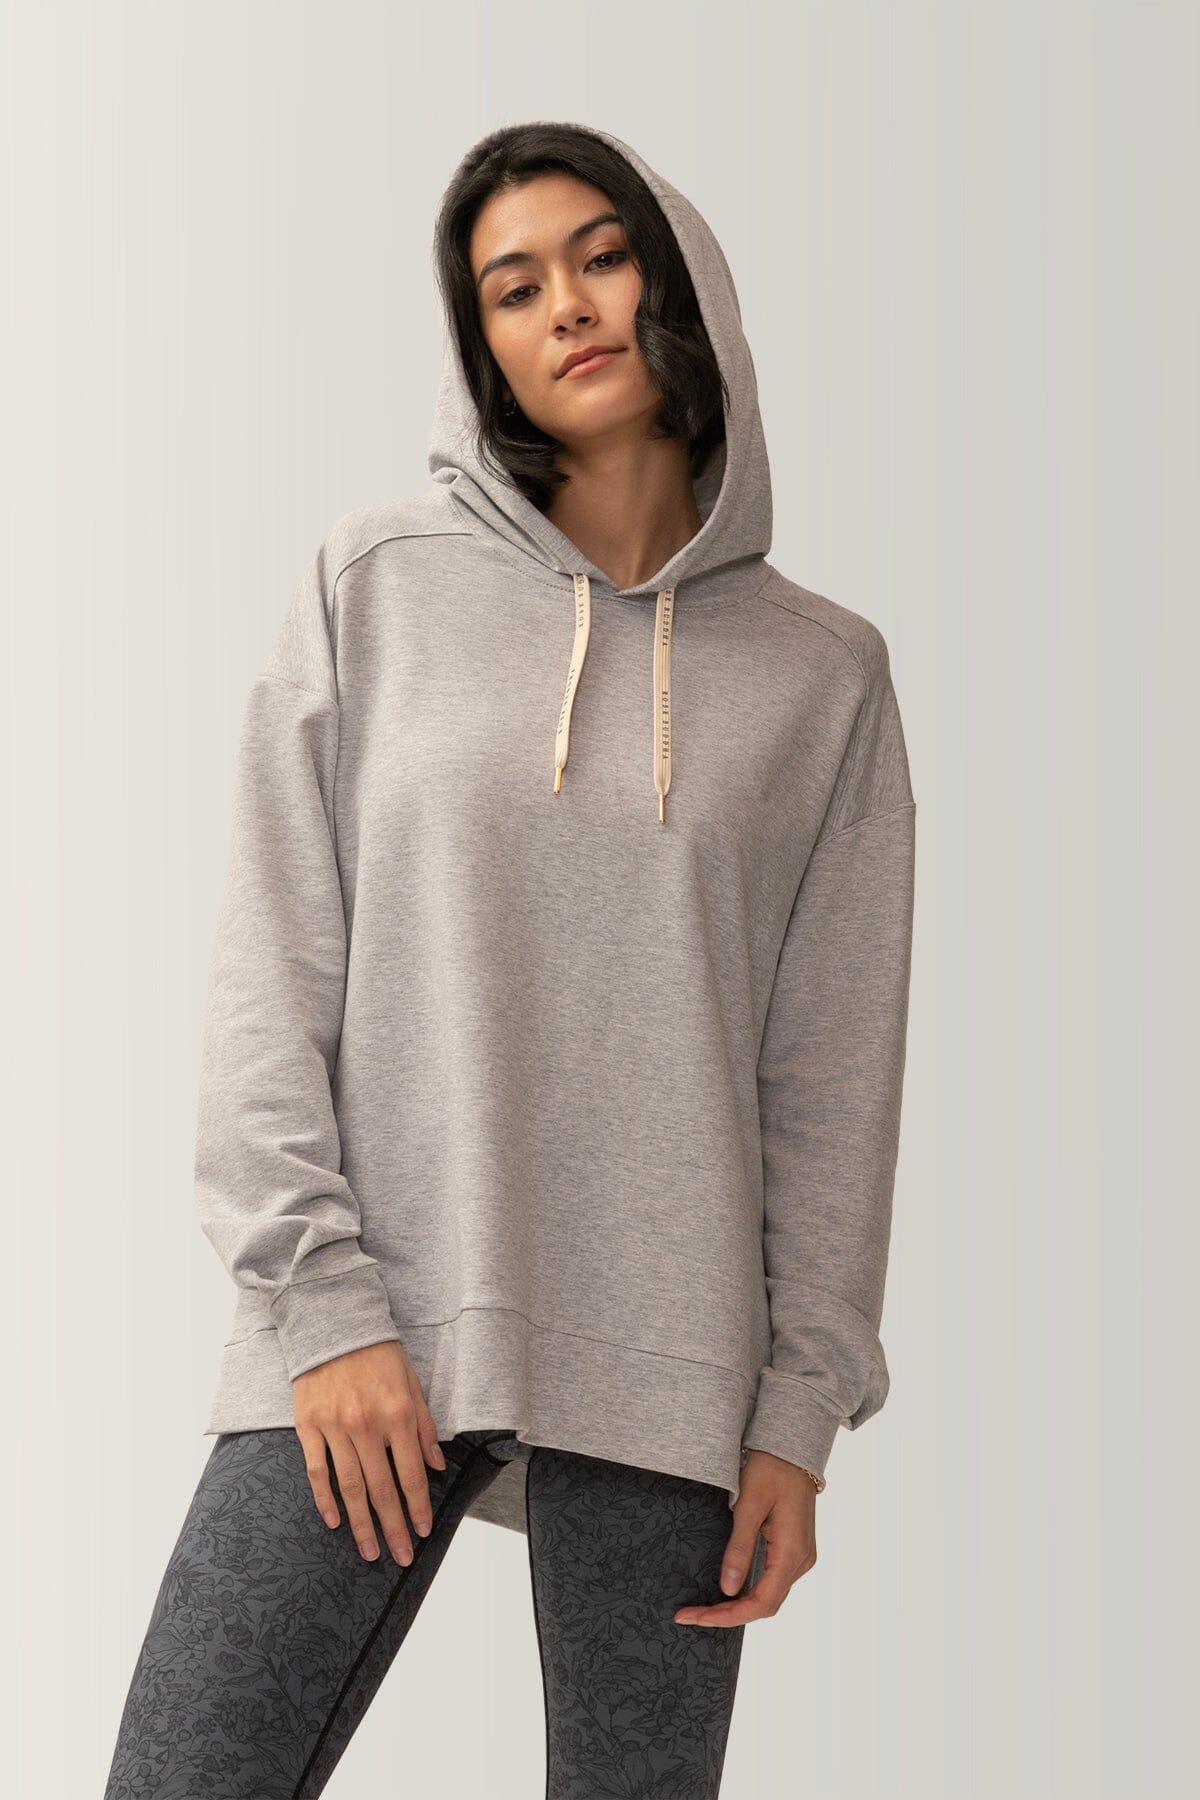 Femme qui porte le chandail Chill out de Rose Boreal./ Women wearing the Chill Out Hoodie by Rose Boreal. -Moon / Lune